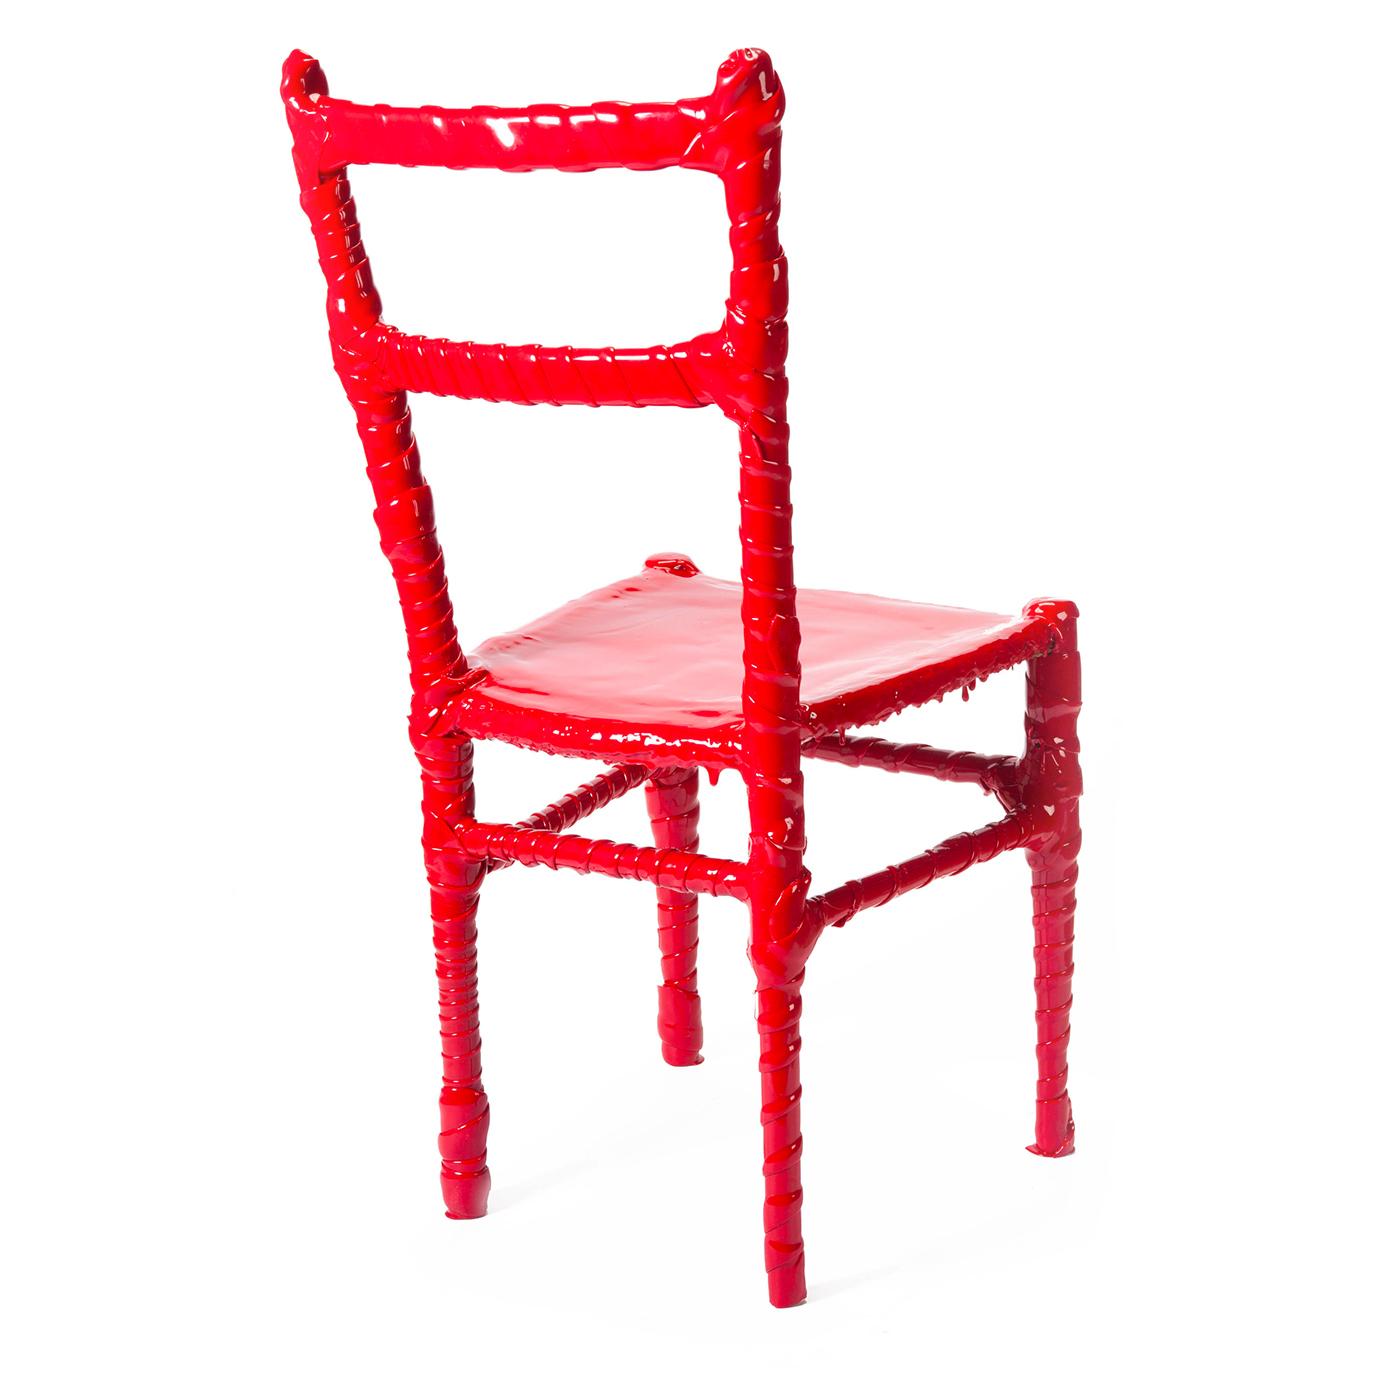 A brand new series of pieces by Paola Navone (2019), manufactured entirely by Corsi Design's craftsmen. All One-Off Collection chairs are part of the upcycling project: forgotten chairs, often ignored or hidden in some corner of the world, are